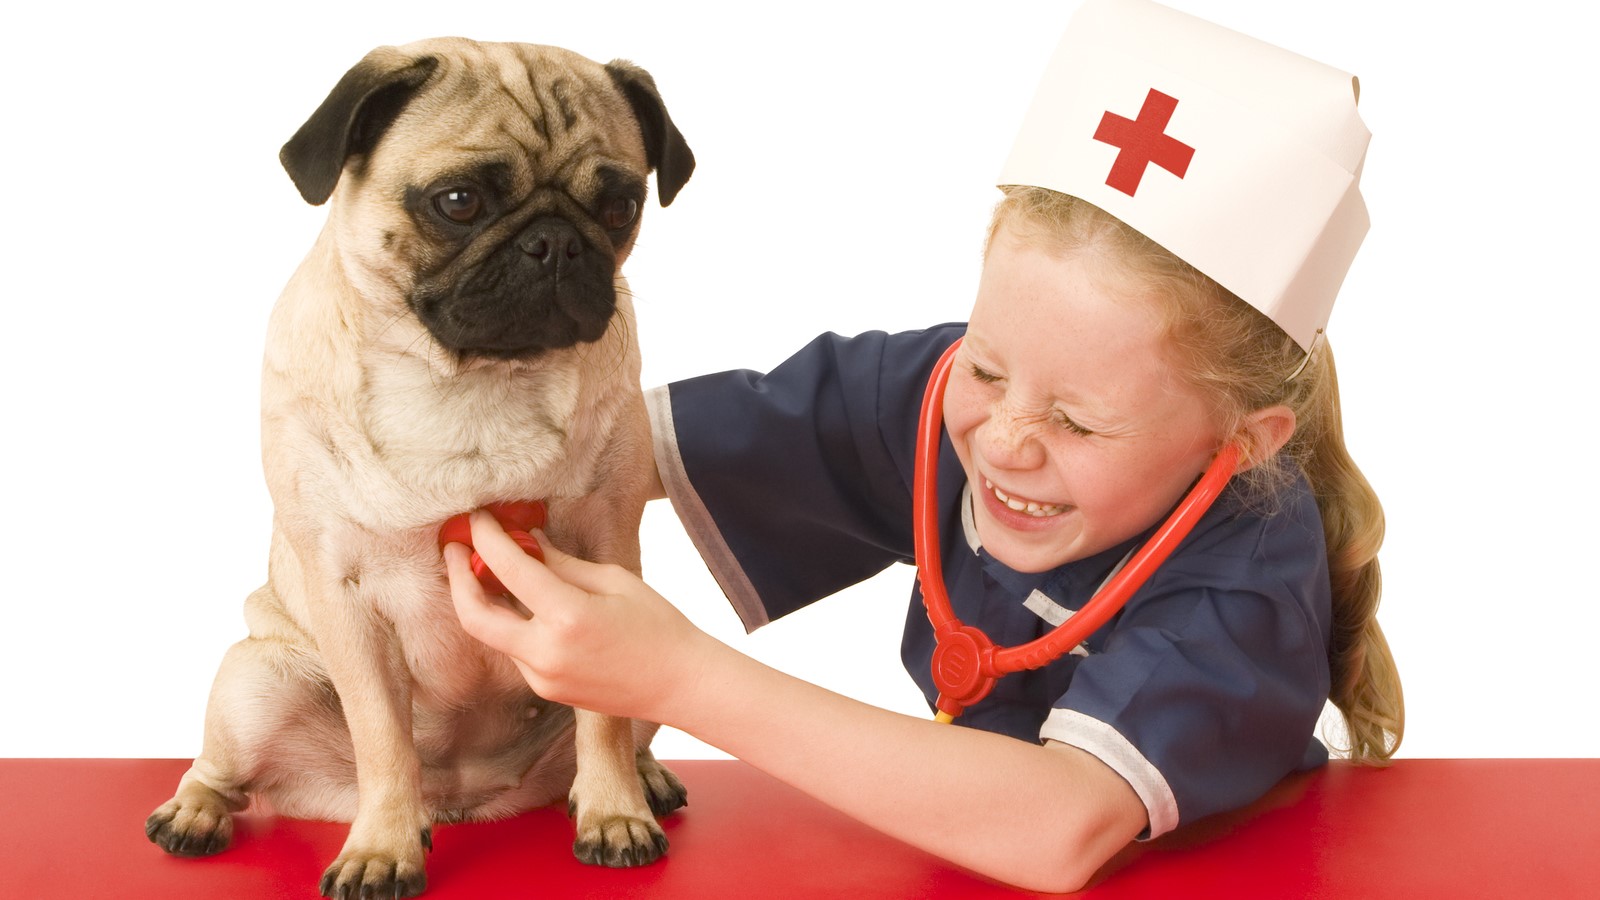 The Best 4 Remedies for Herbal First Aid for Dogs